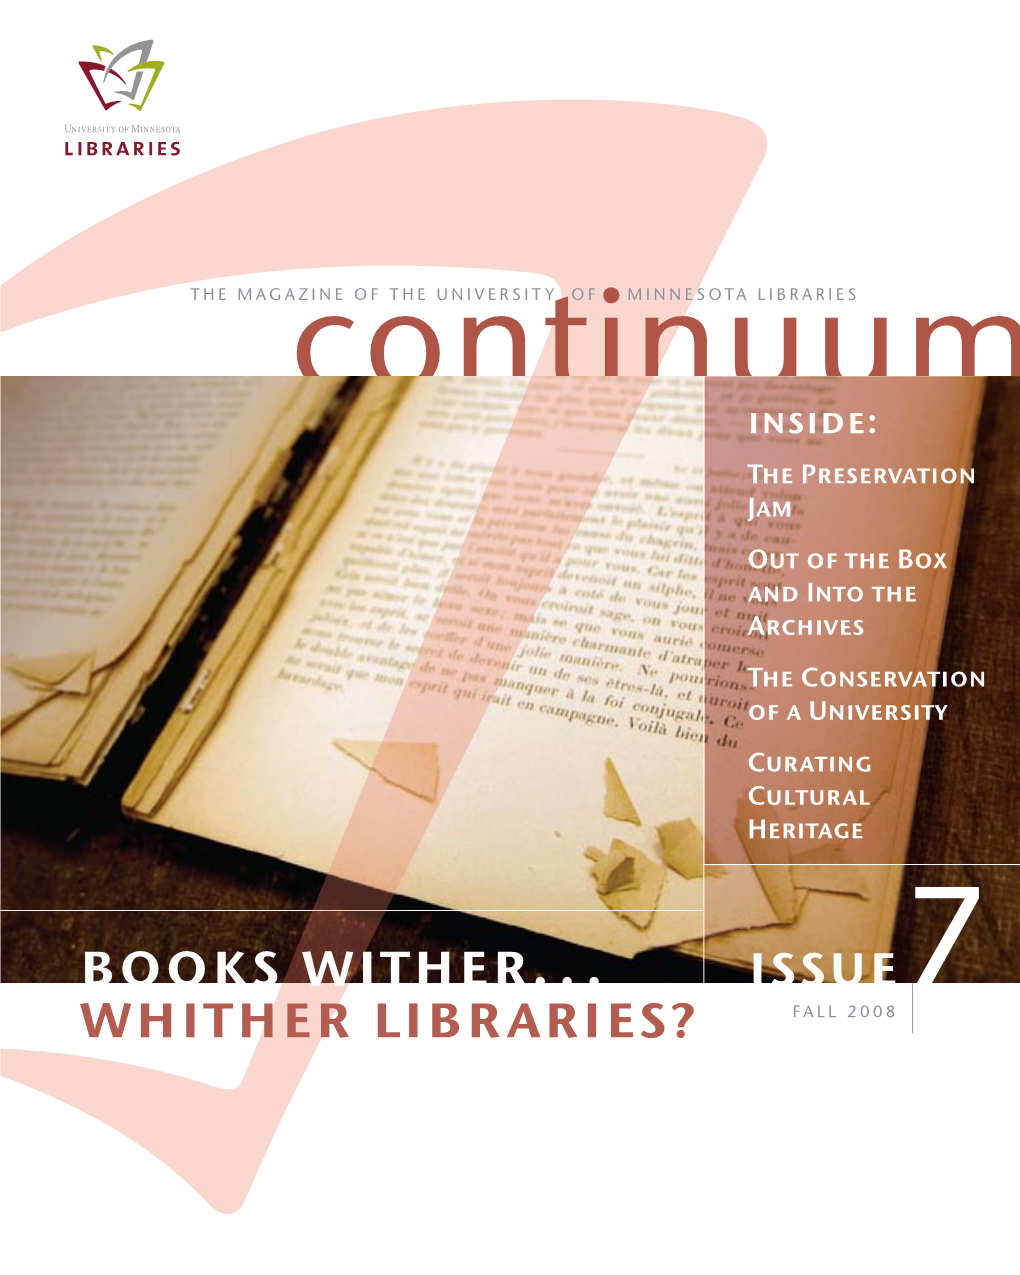 Books Wither. . . Whither Libraries?